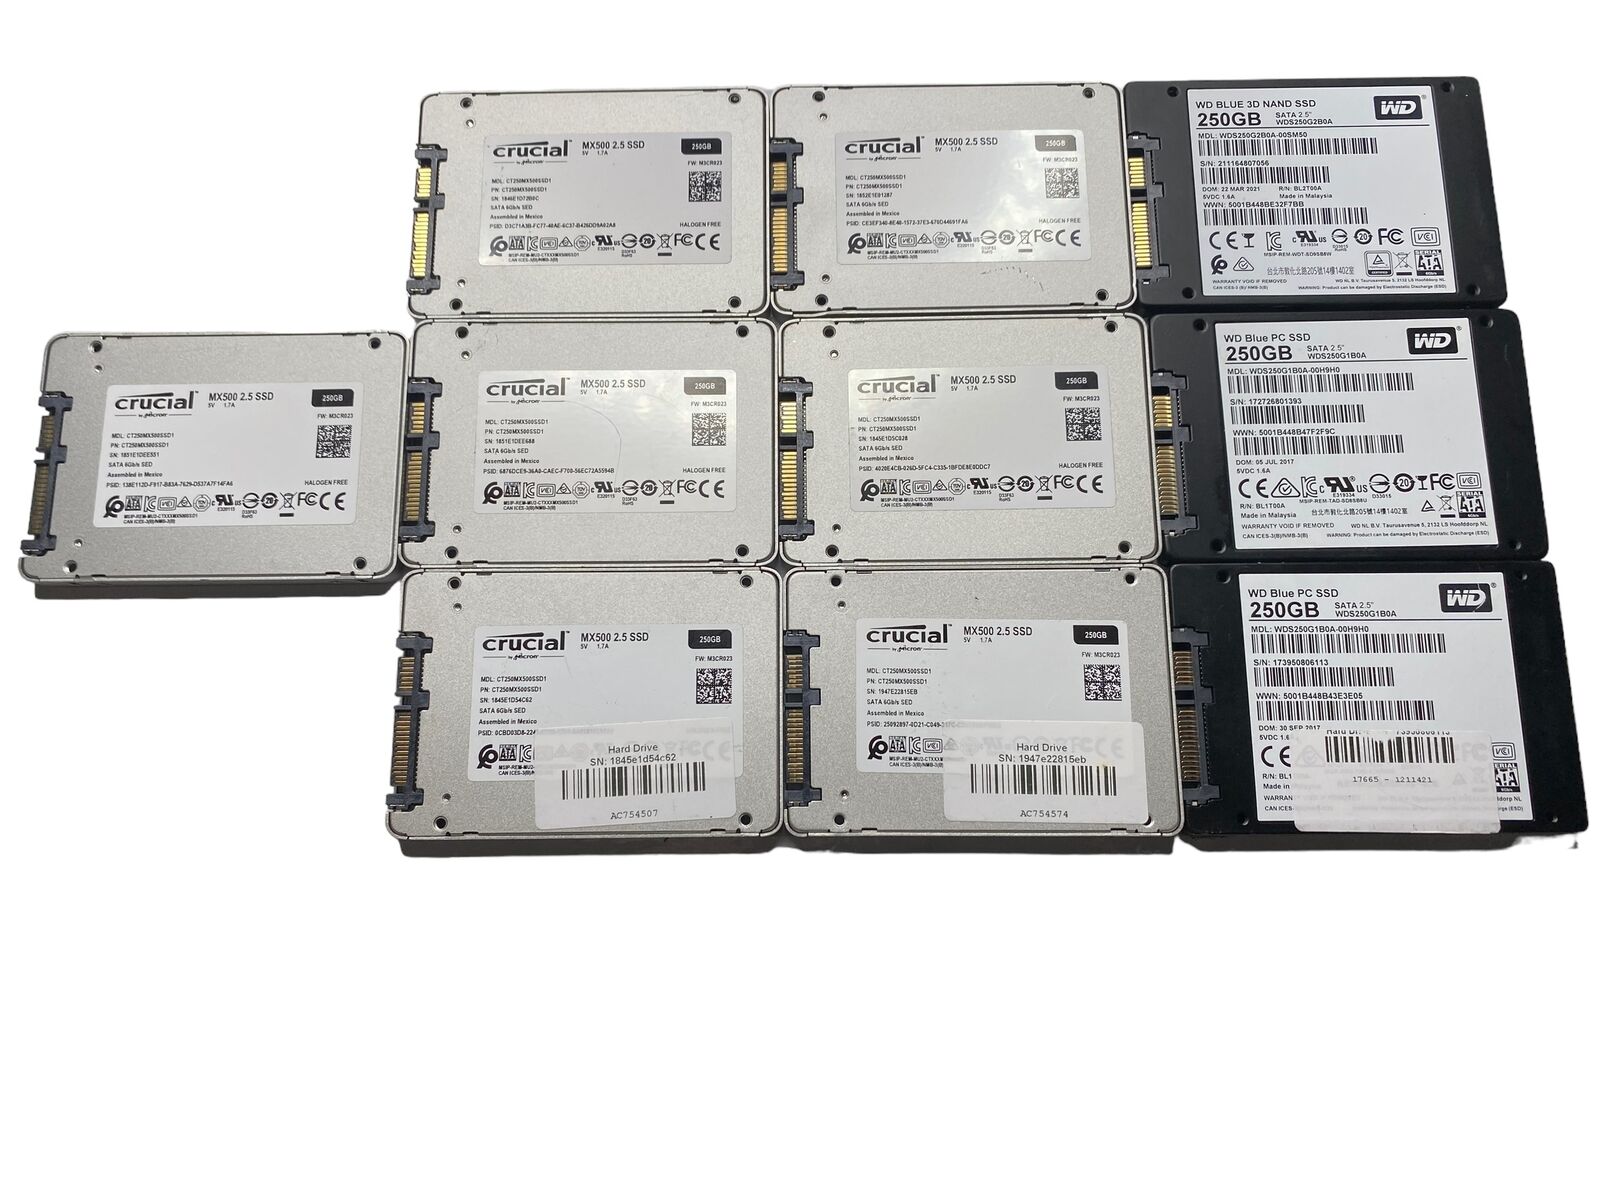 Lot of 10 Mixed Brand Model 250GB 2.5